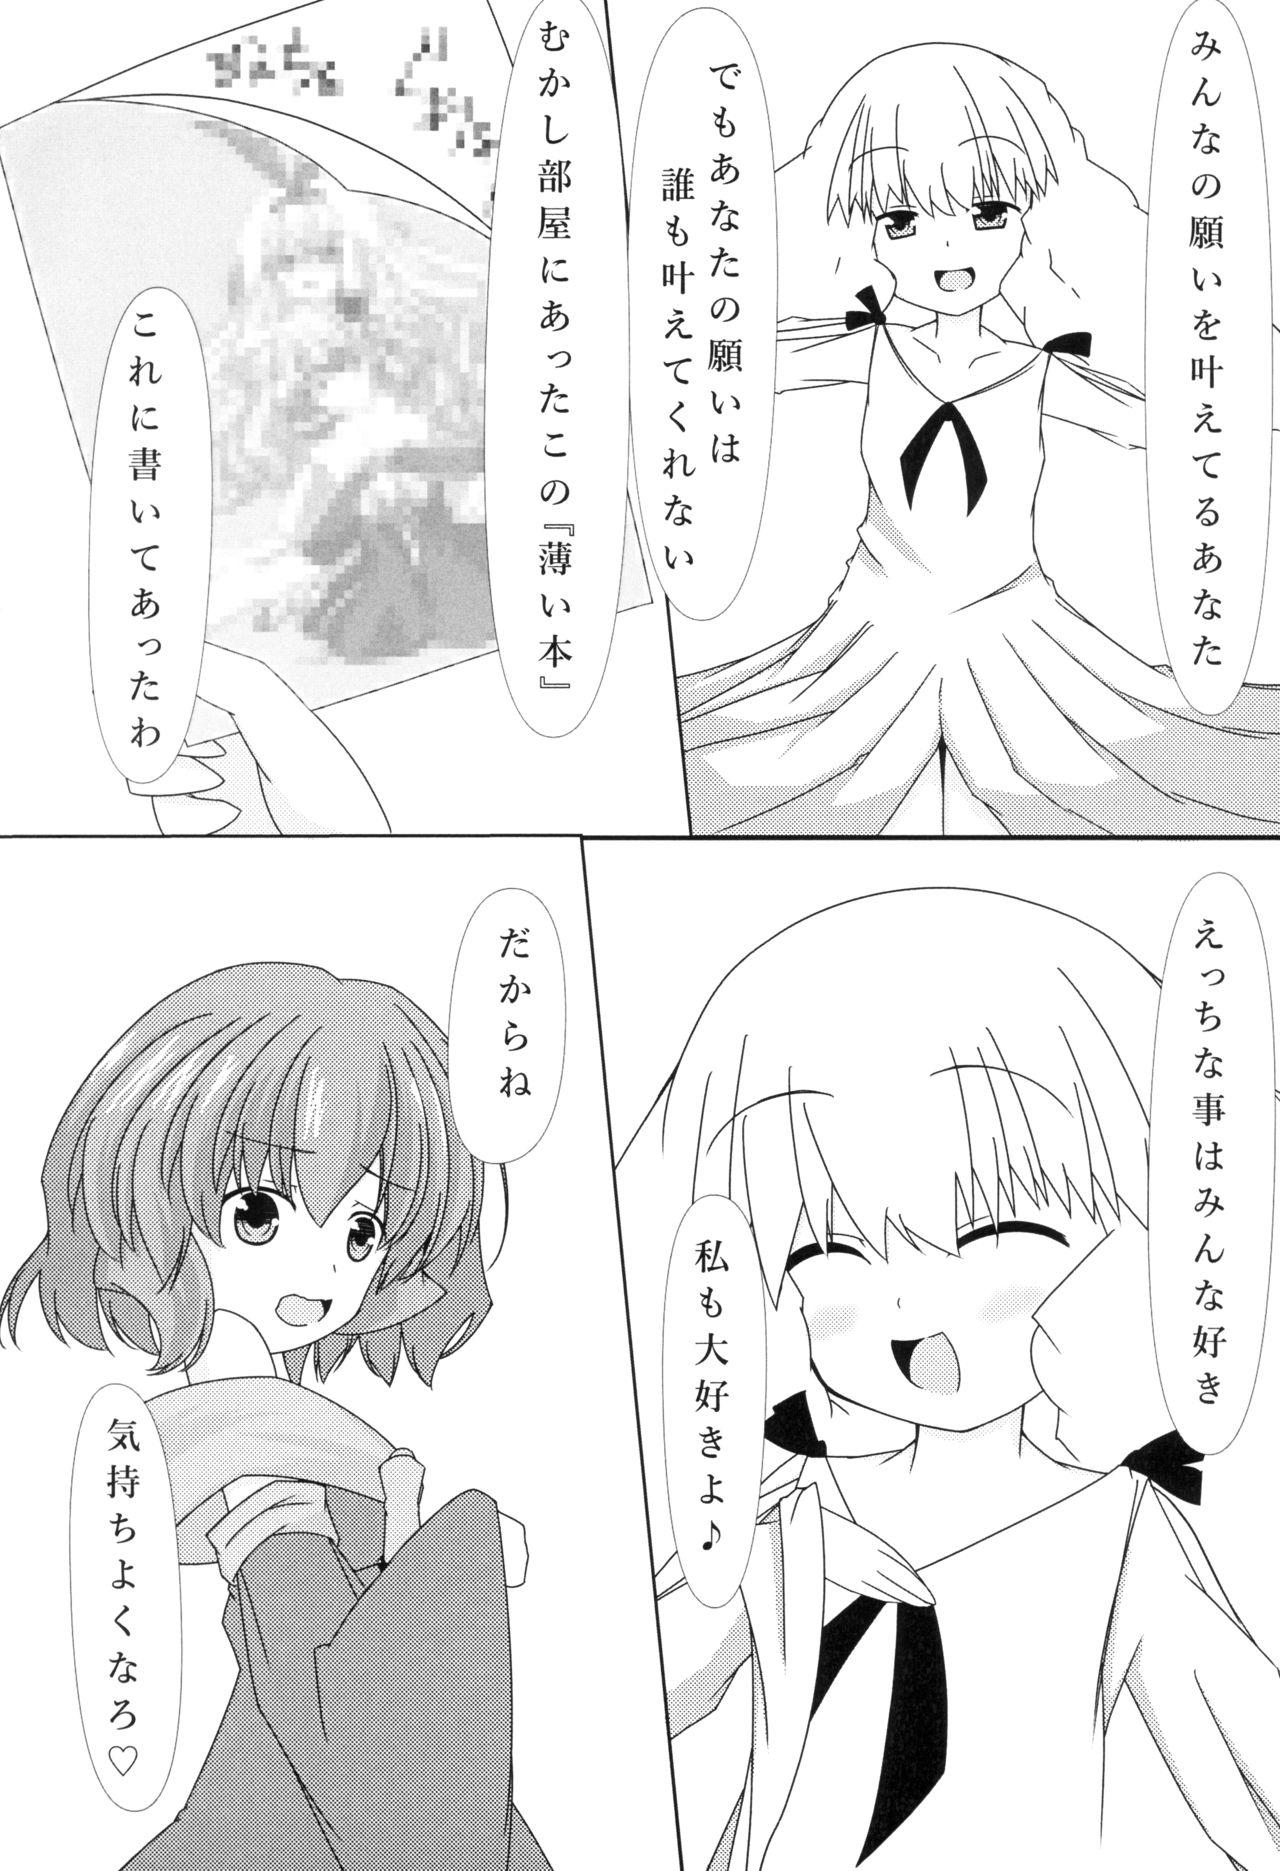 Buttfucking ピルルクたん発情中 - Selector infected wixoss Negro - Page 6